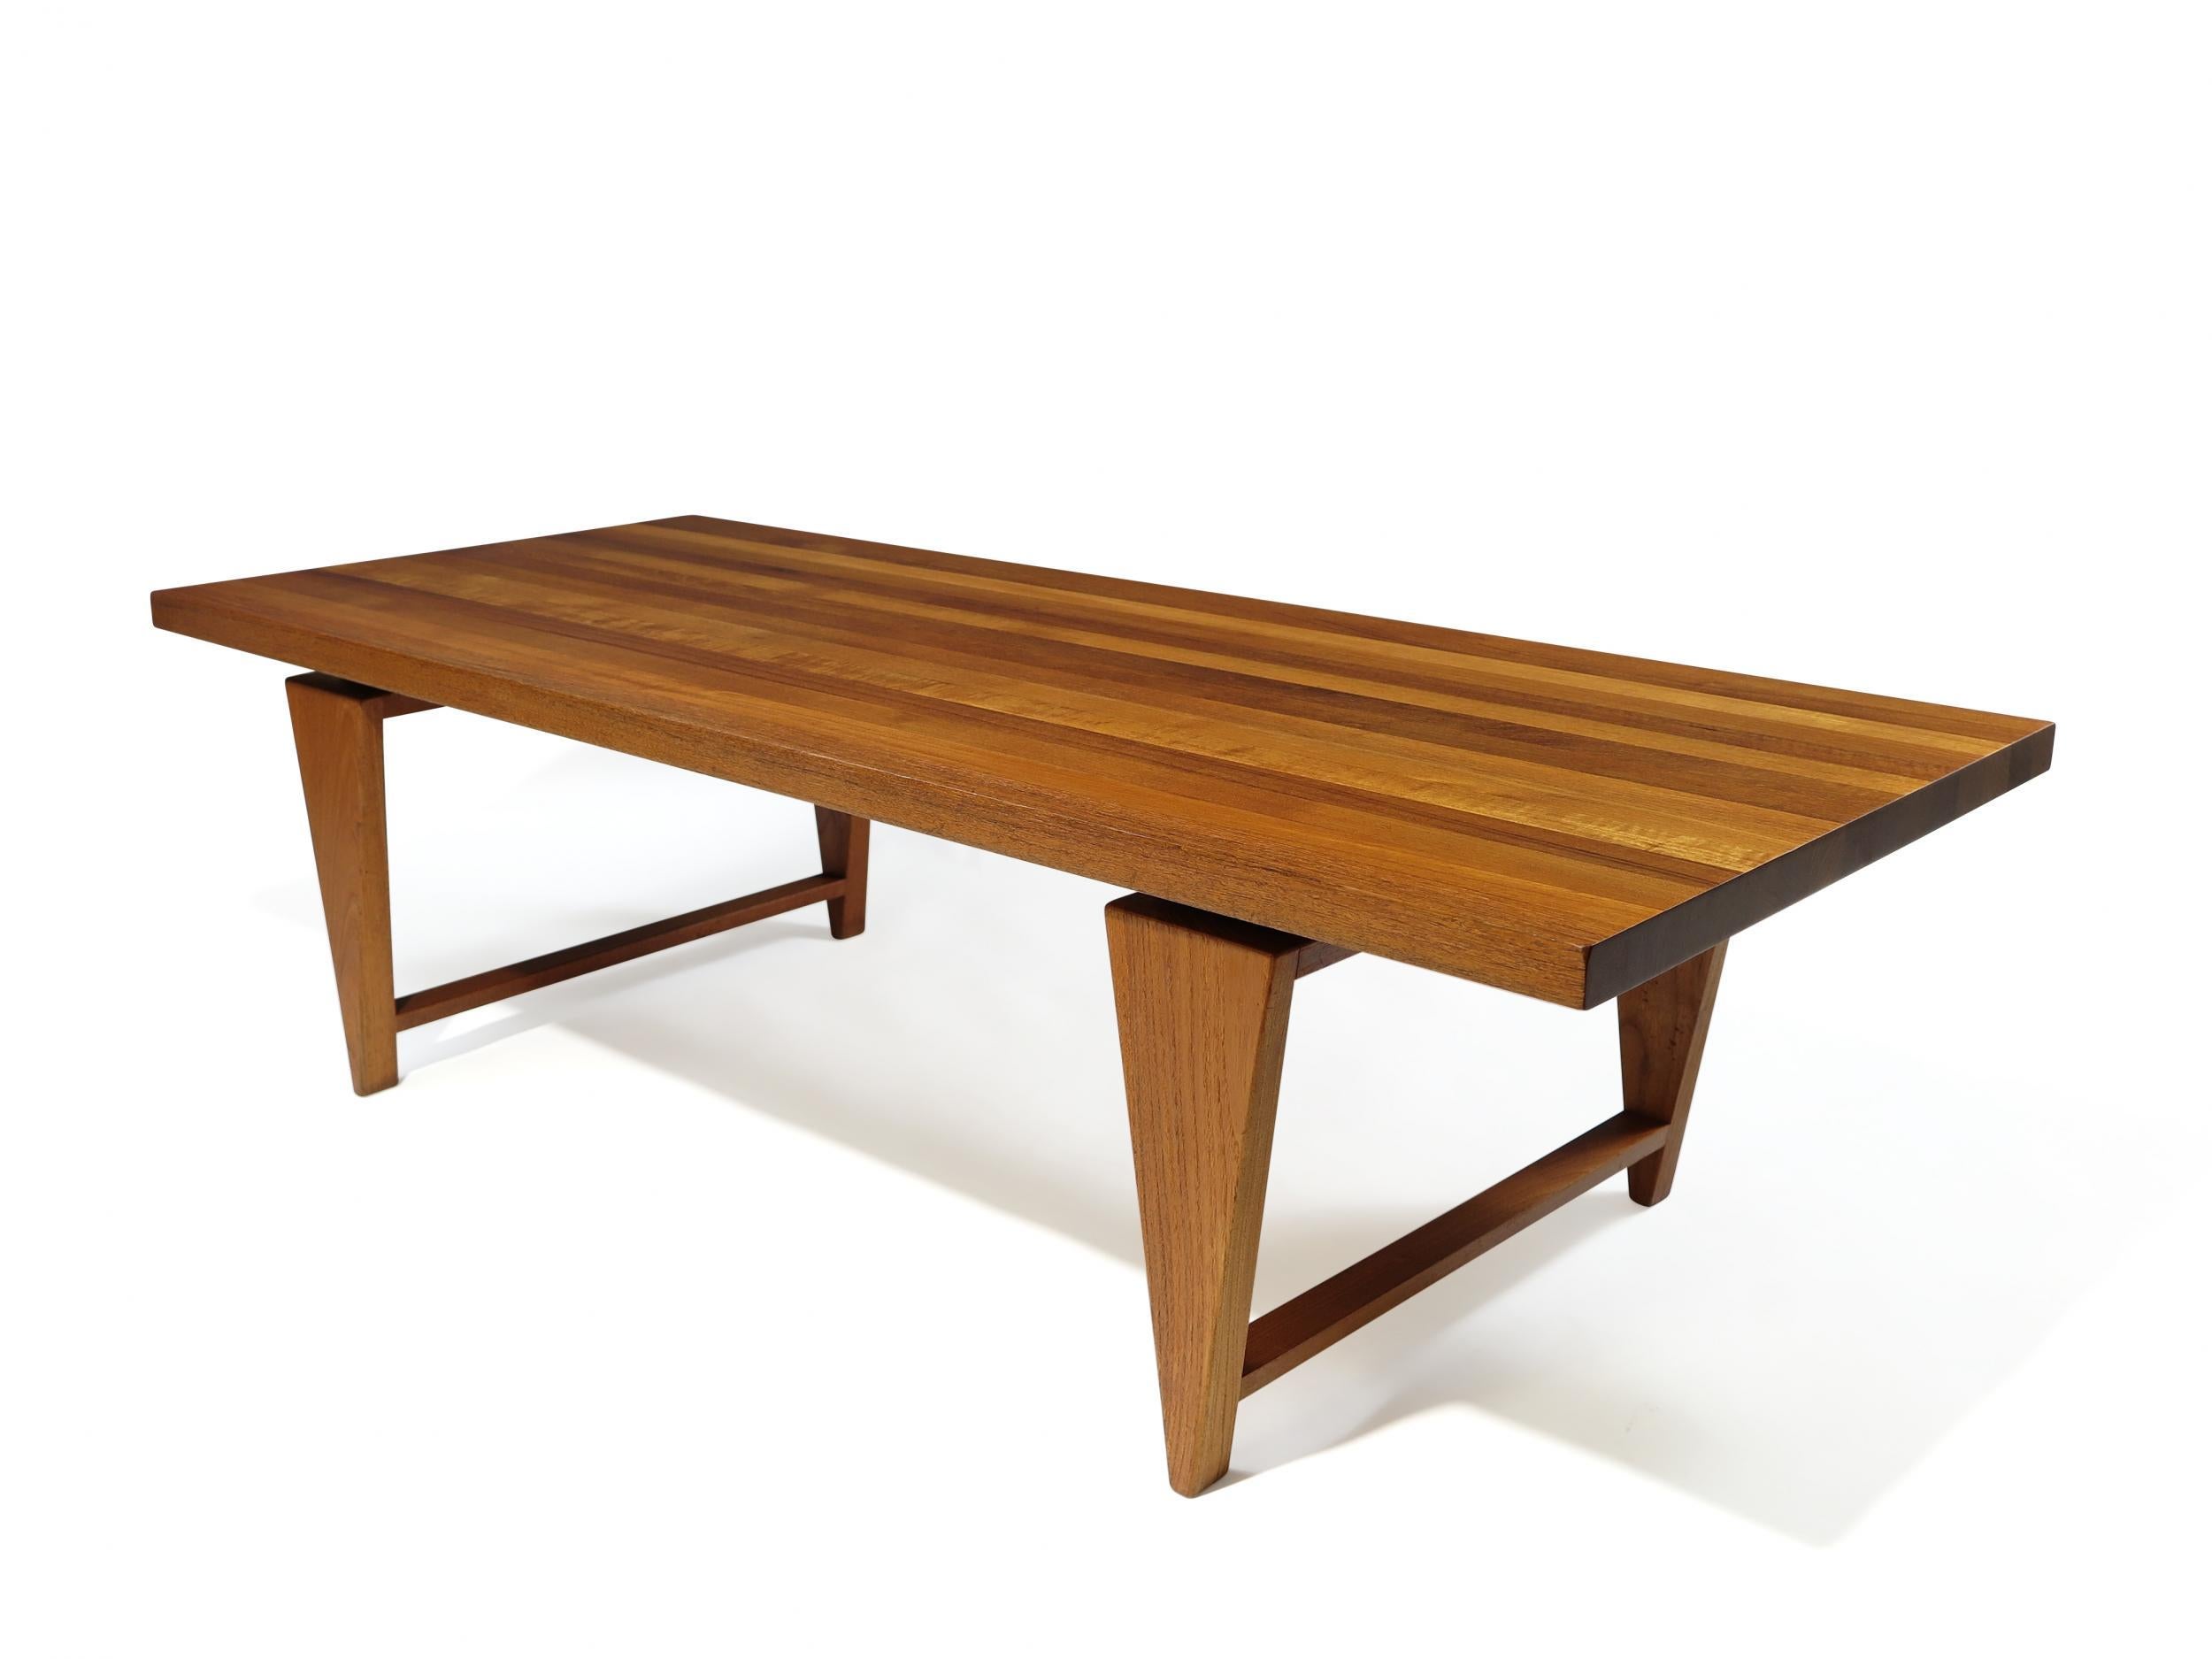 Danish midcentury teak coffee table designed by Illum Wikkelso for Mikael Laursen, Model ML 115 Denmark. Crafted of the solid teak plank, raised on sculptural angled legs.